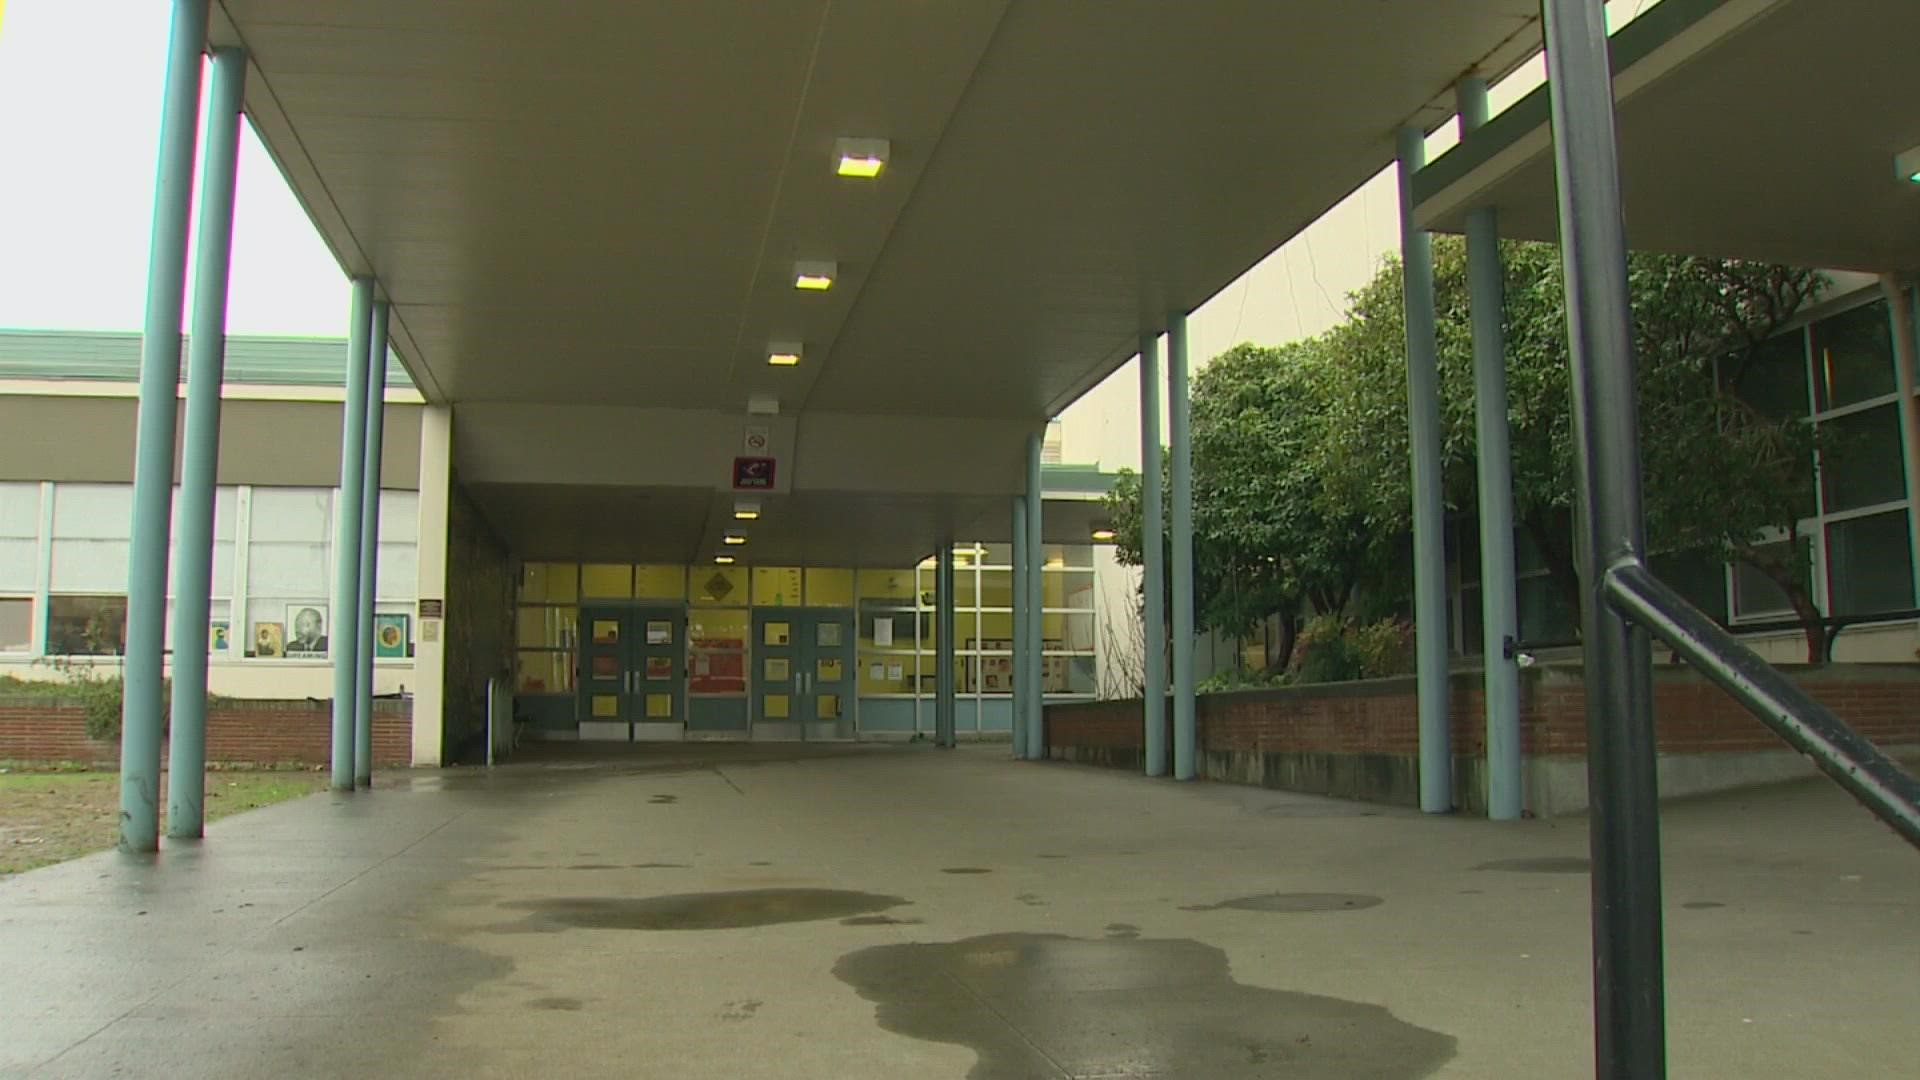 The Seattle School District made the decision to cancel classes at both the elementary and Franklin High School for one day over staffing shortages.